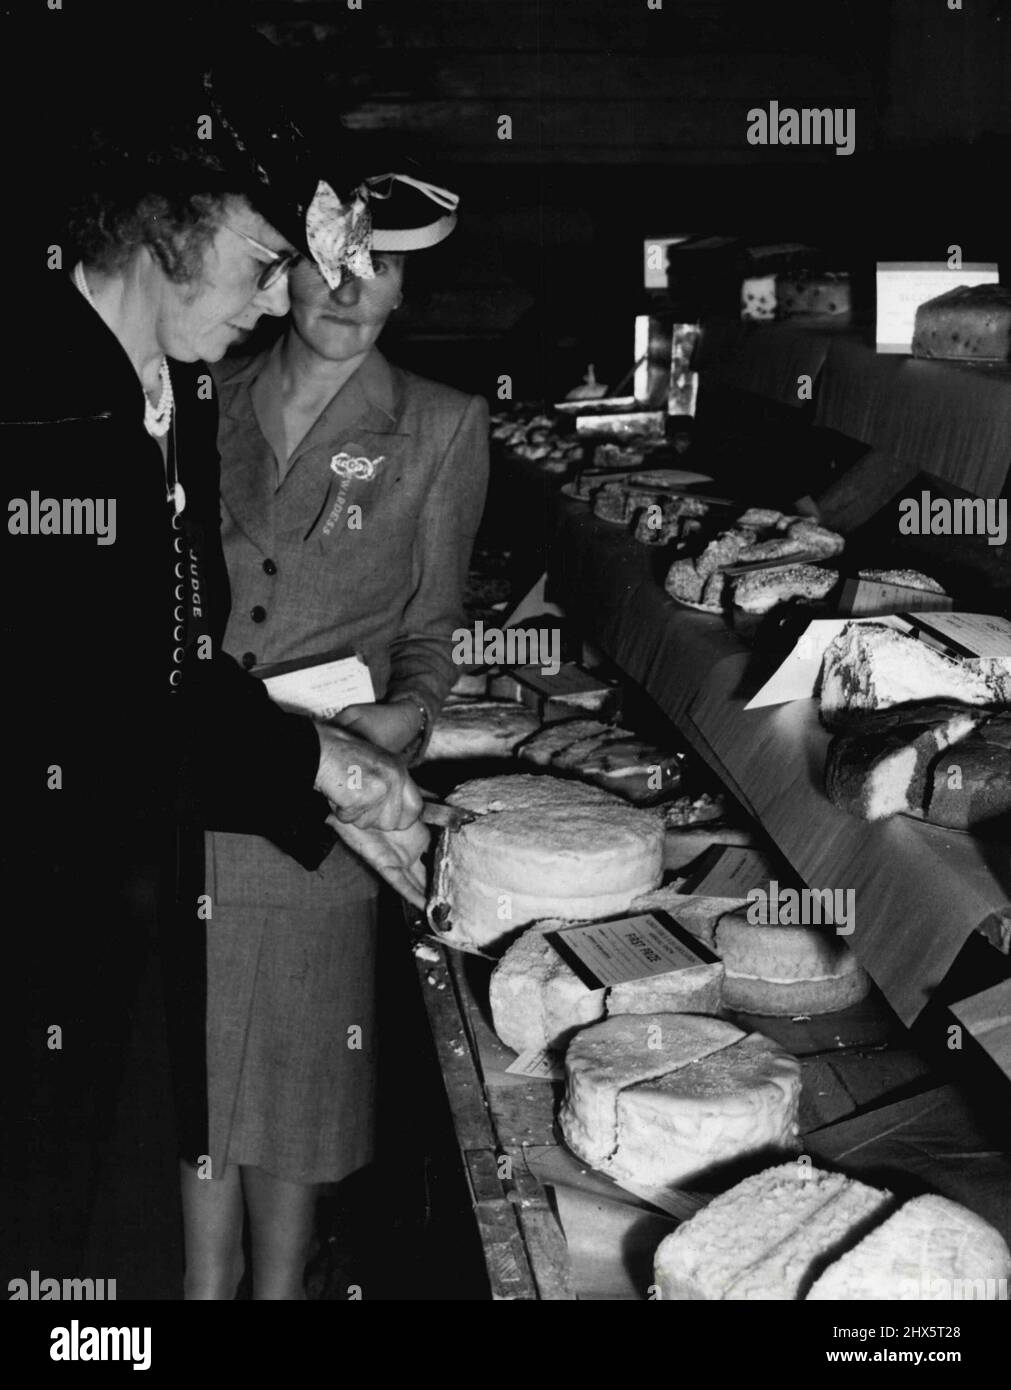 Miss Florrie James, home section judge, cuts the first prize iced rainbow cake. February 28, 1948. Stock Photo